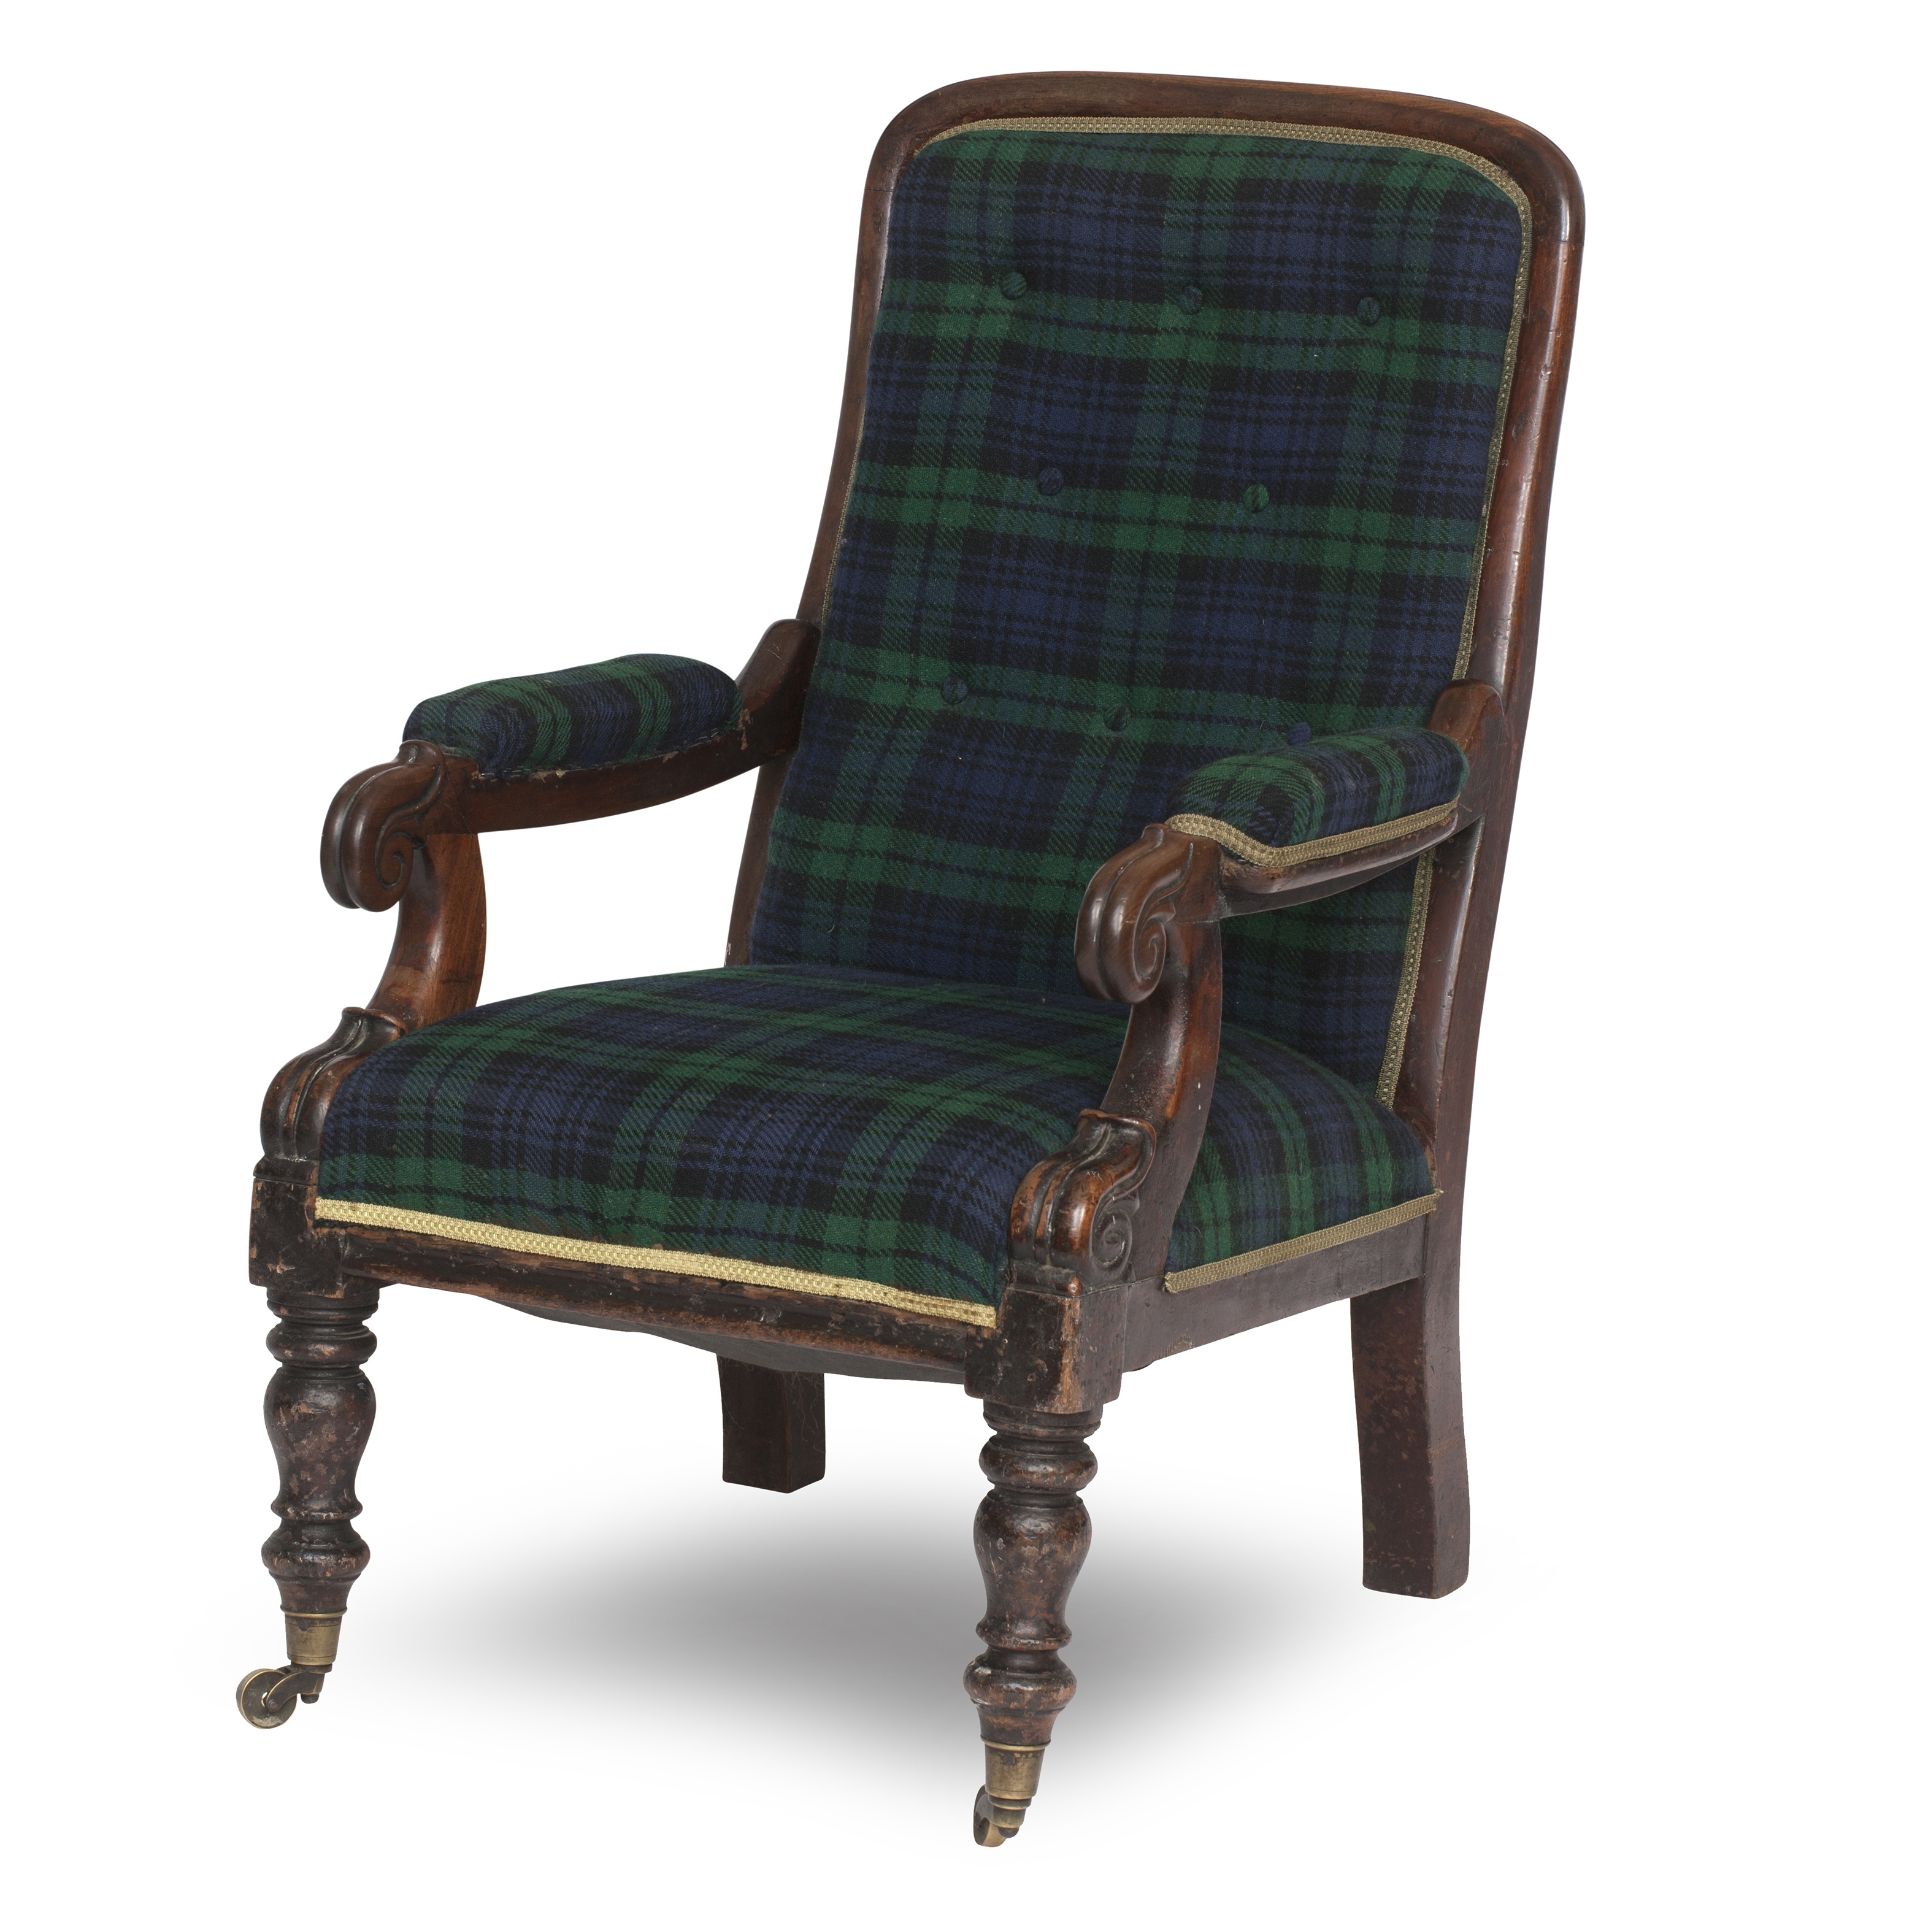 An early Victorian mahogany and tartan upholstered armchair